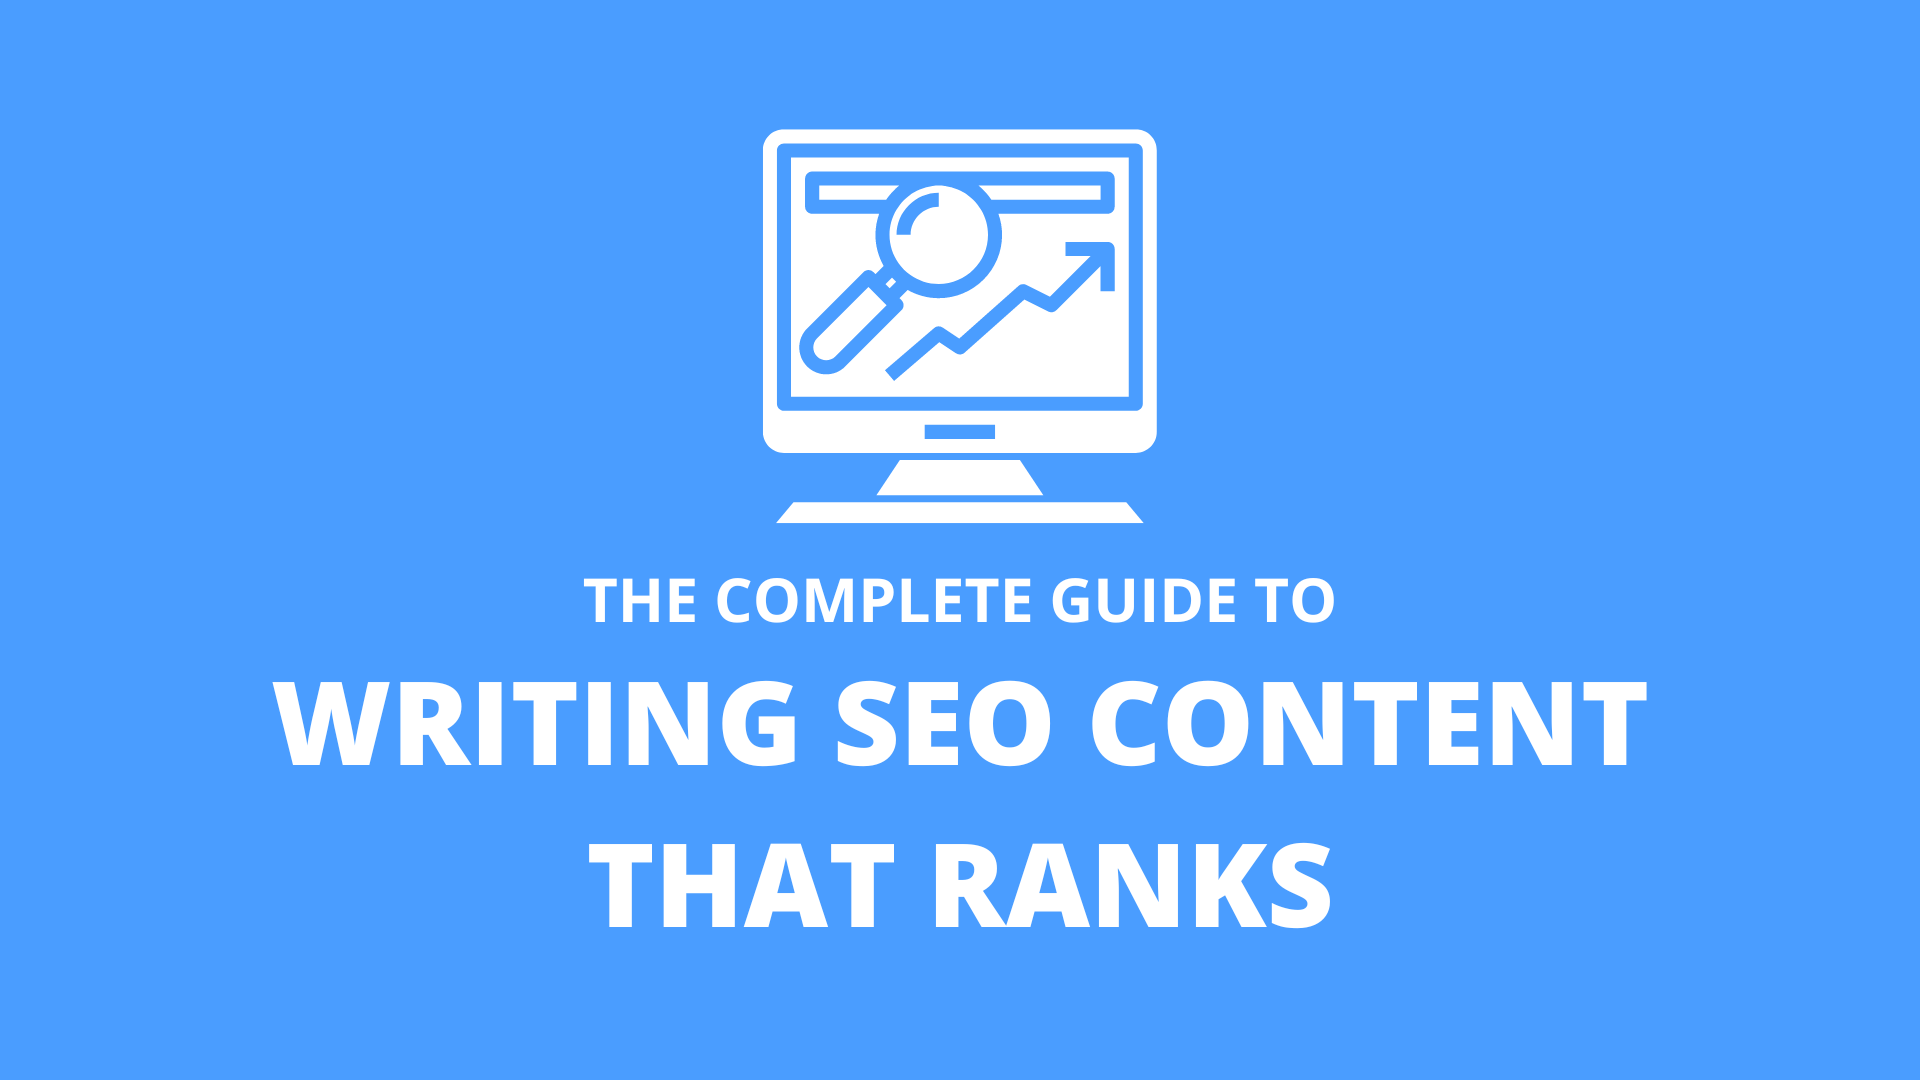 The Complete Guide to Writing SEO Content That Ranks